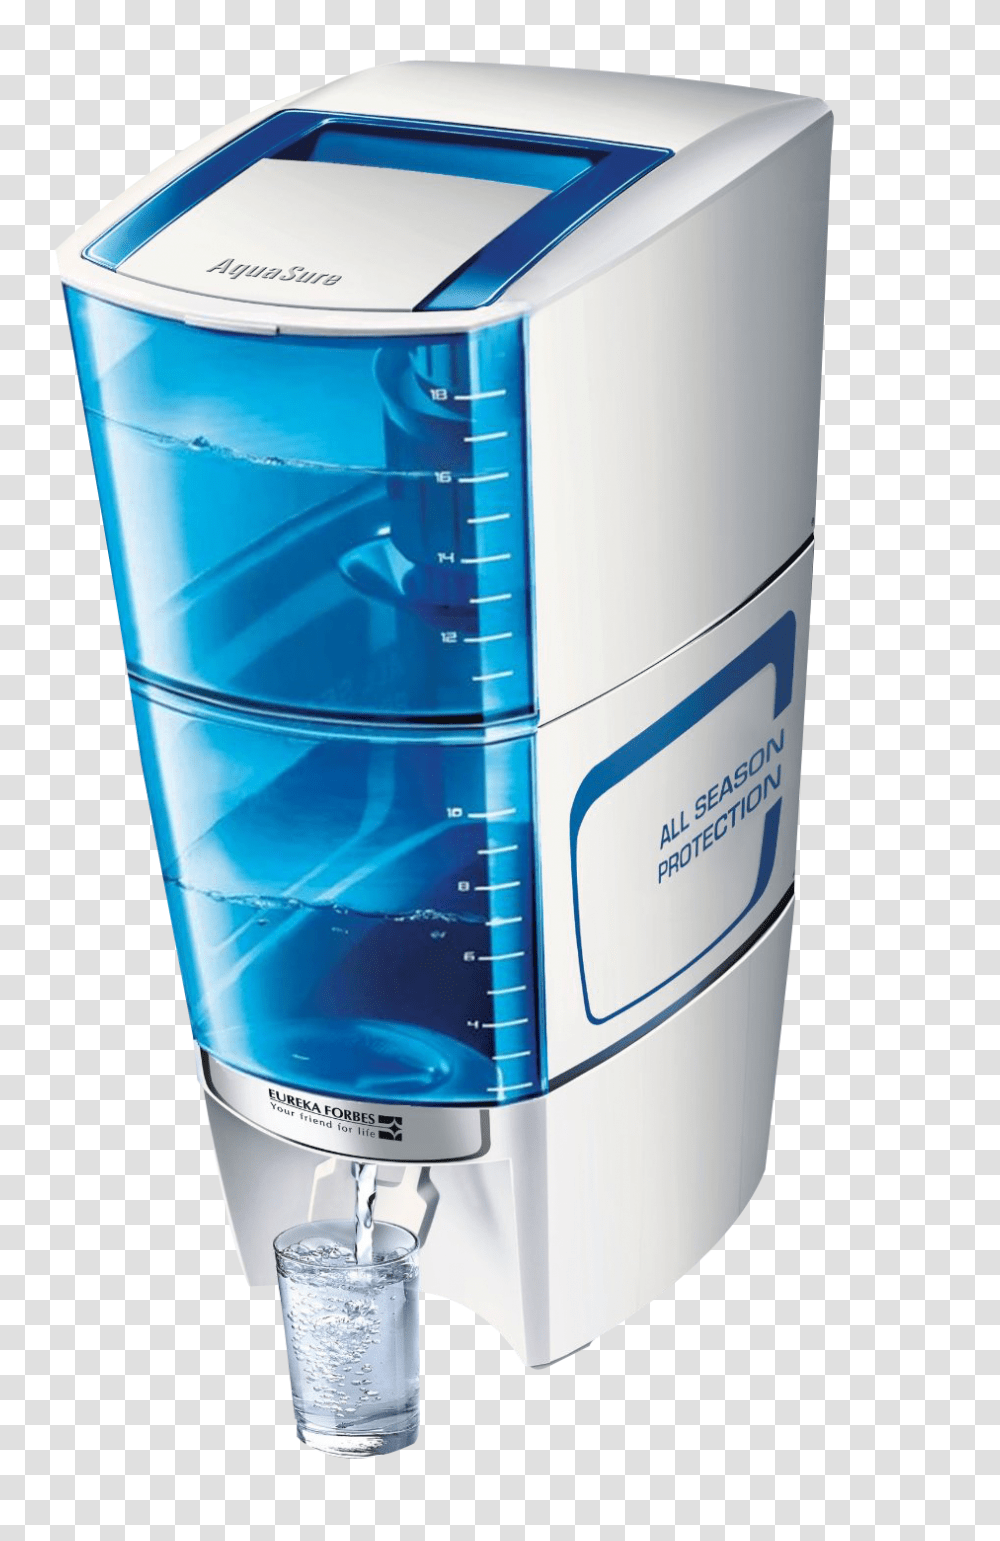 Water Purifier With Glass Image, Electronics, Appliance, Mixer, Cooler Transparent Png